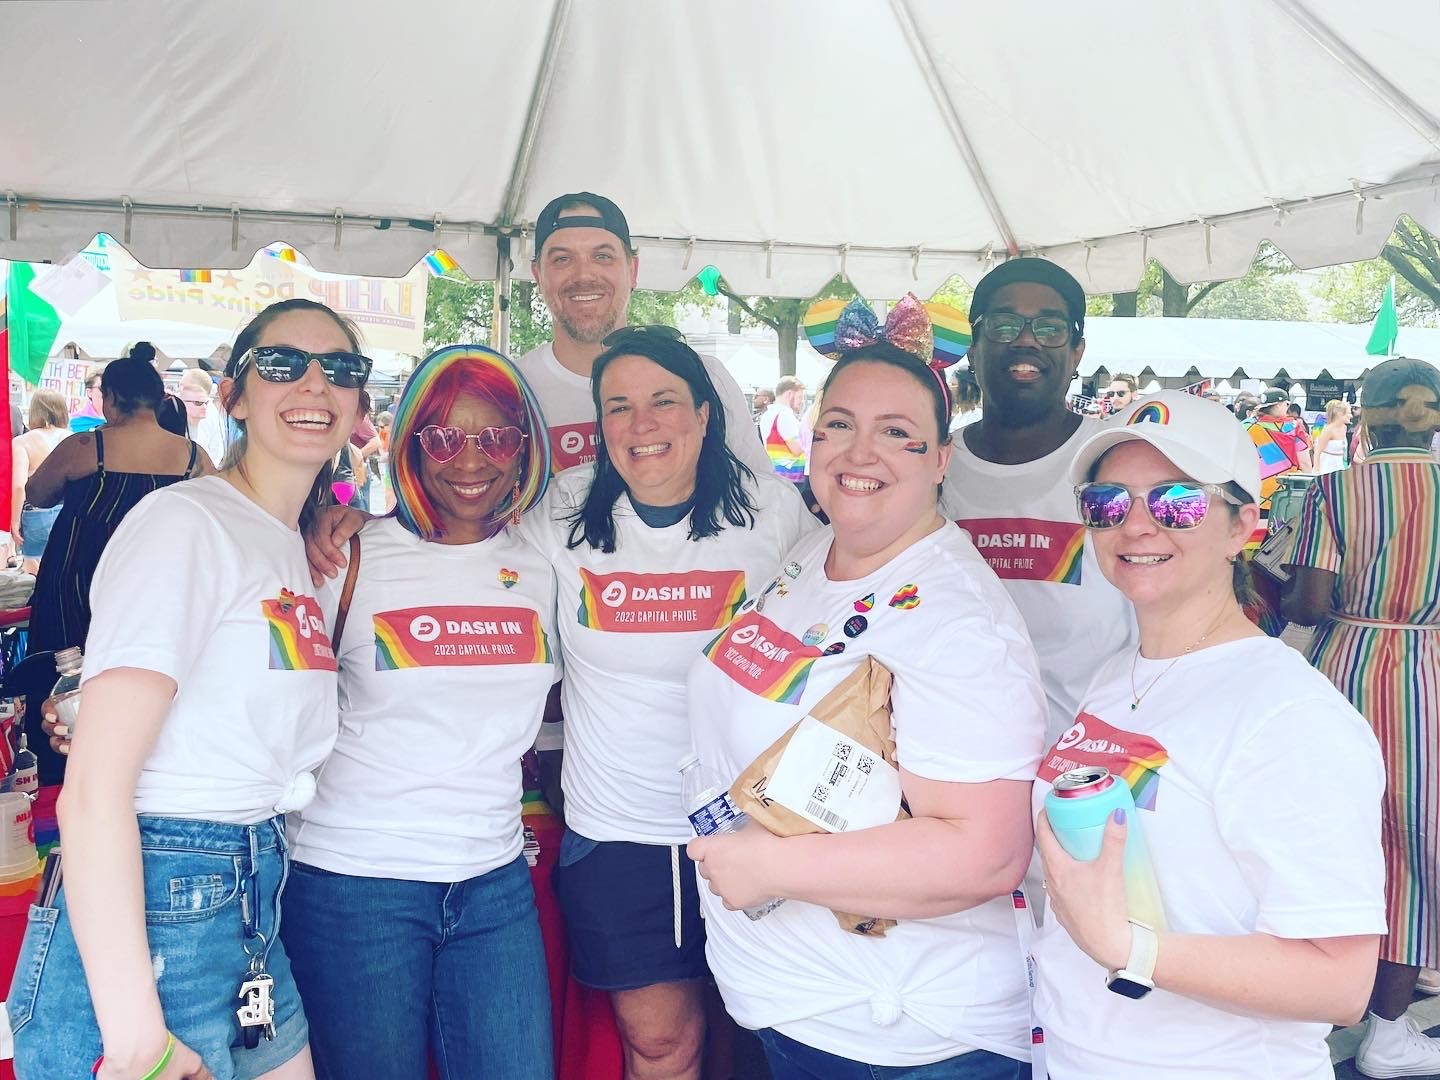 Wills Group team represents Dash In at the 2023 Capital Pride Festival in Washington, D.C. during 2023 Pride Month. 